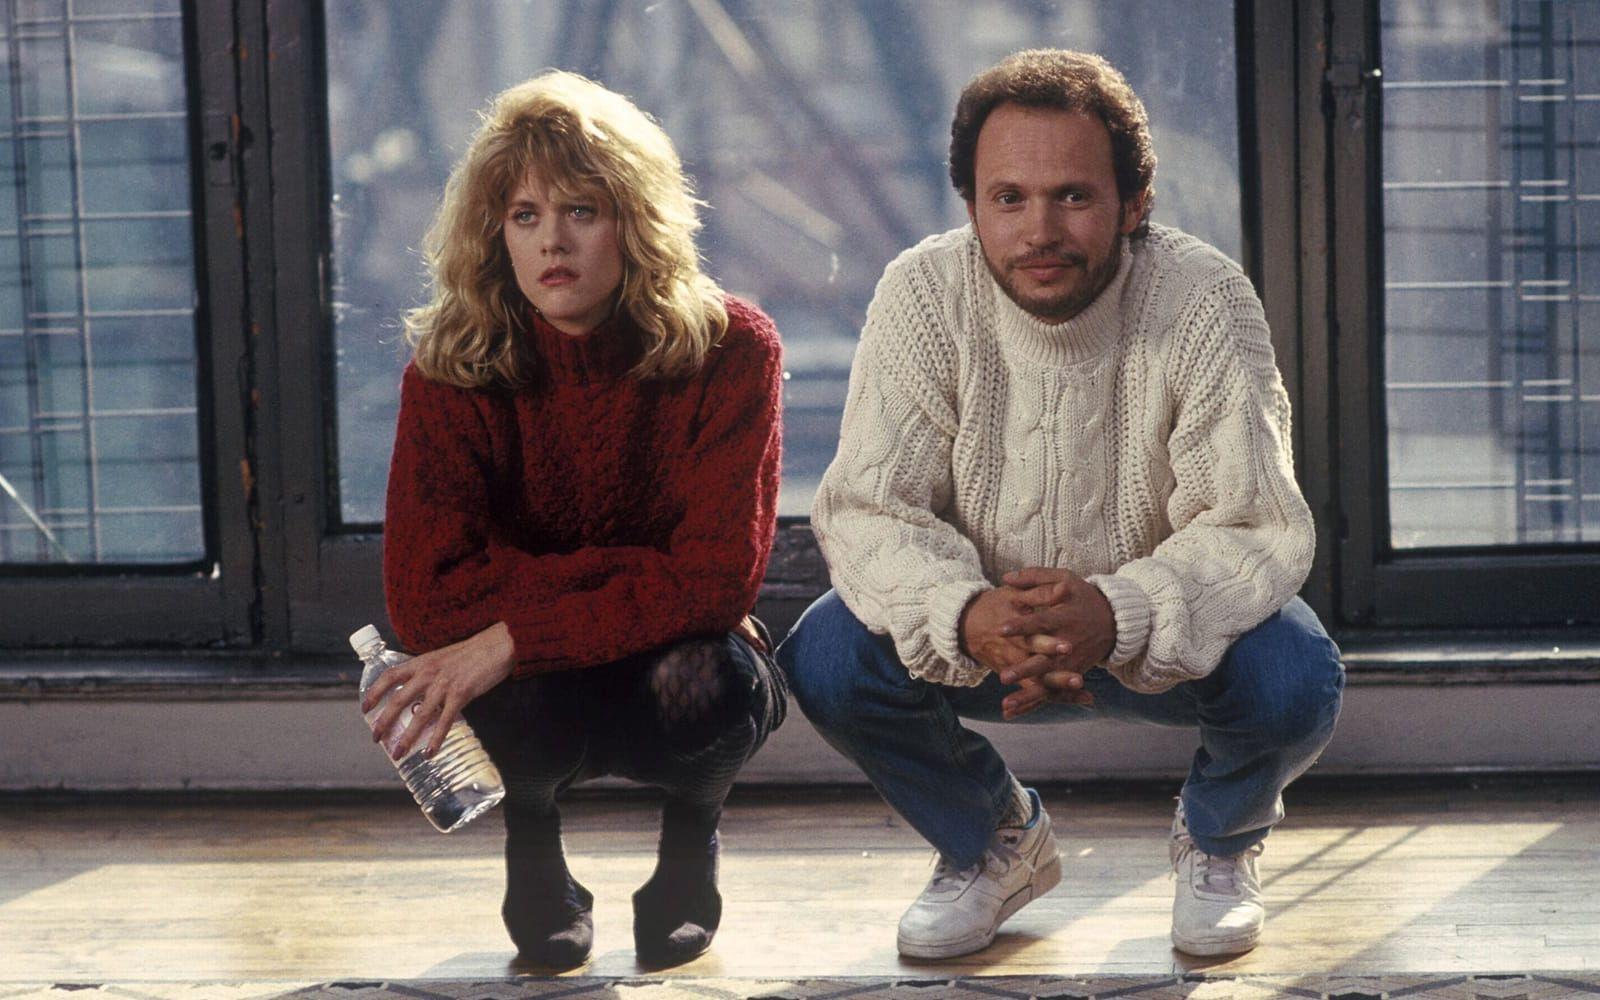 ”I came here tonight because when you realize you want to spend the rest of your life with somebody, you want the rest of your life to start as soon as possible.” - Harry Burns (Billy Crystal) till Sally (Meg Ryan) i ”När Harry mötte Sally” från 1989. Citatet från filmen rankades nyligen som det 97 bästa citatet i Hollywoods historia enligt The Hollywood Reporter. Foto: Stella Pictures